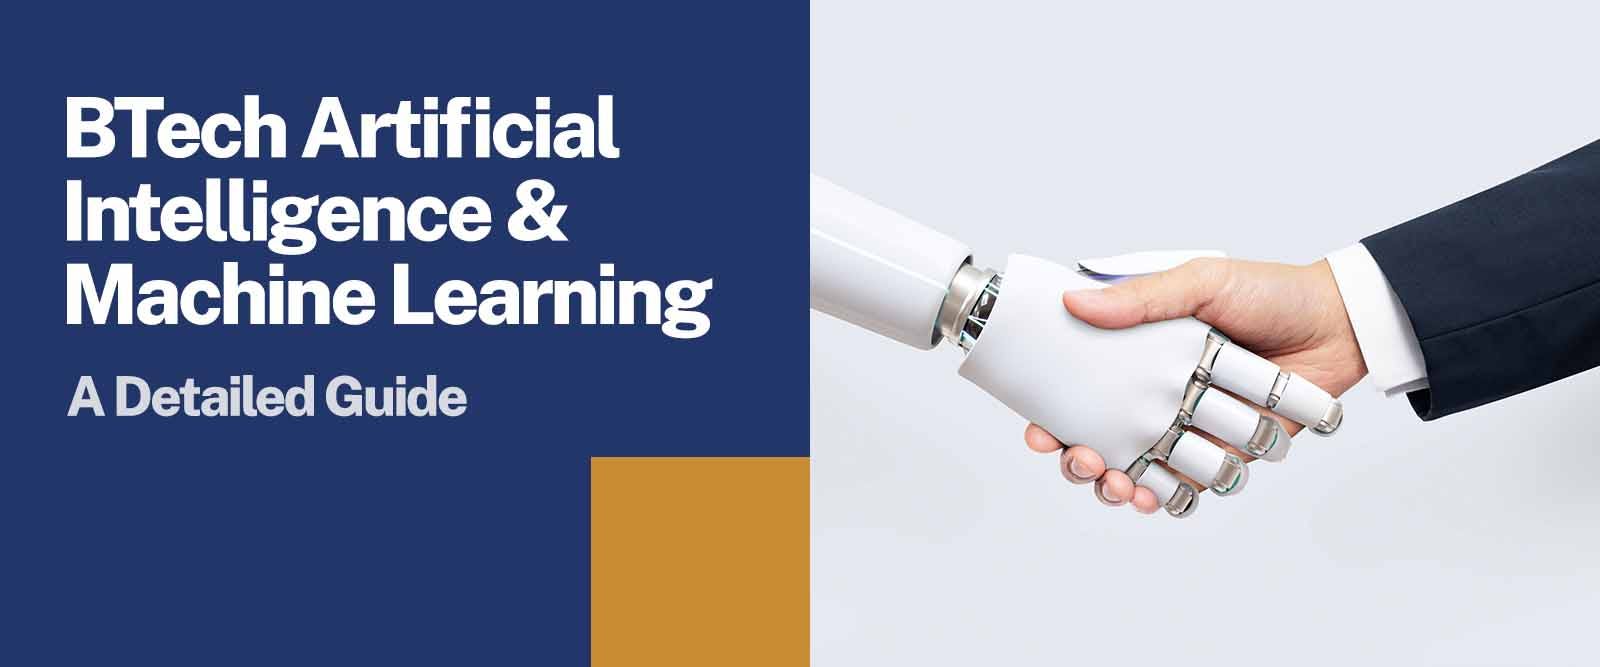 BTech Artificial Intelligence & Machine Learning A Guide